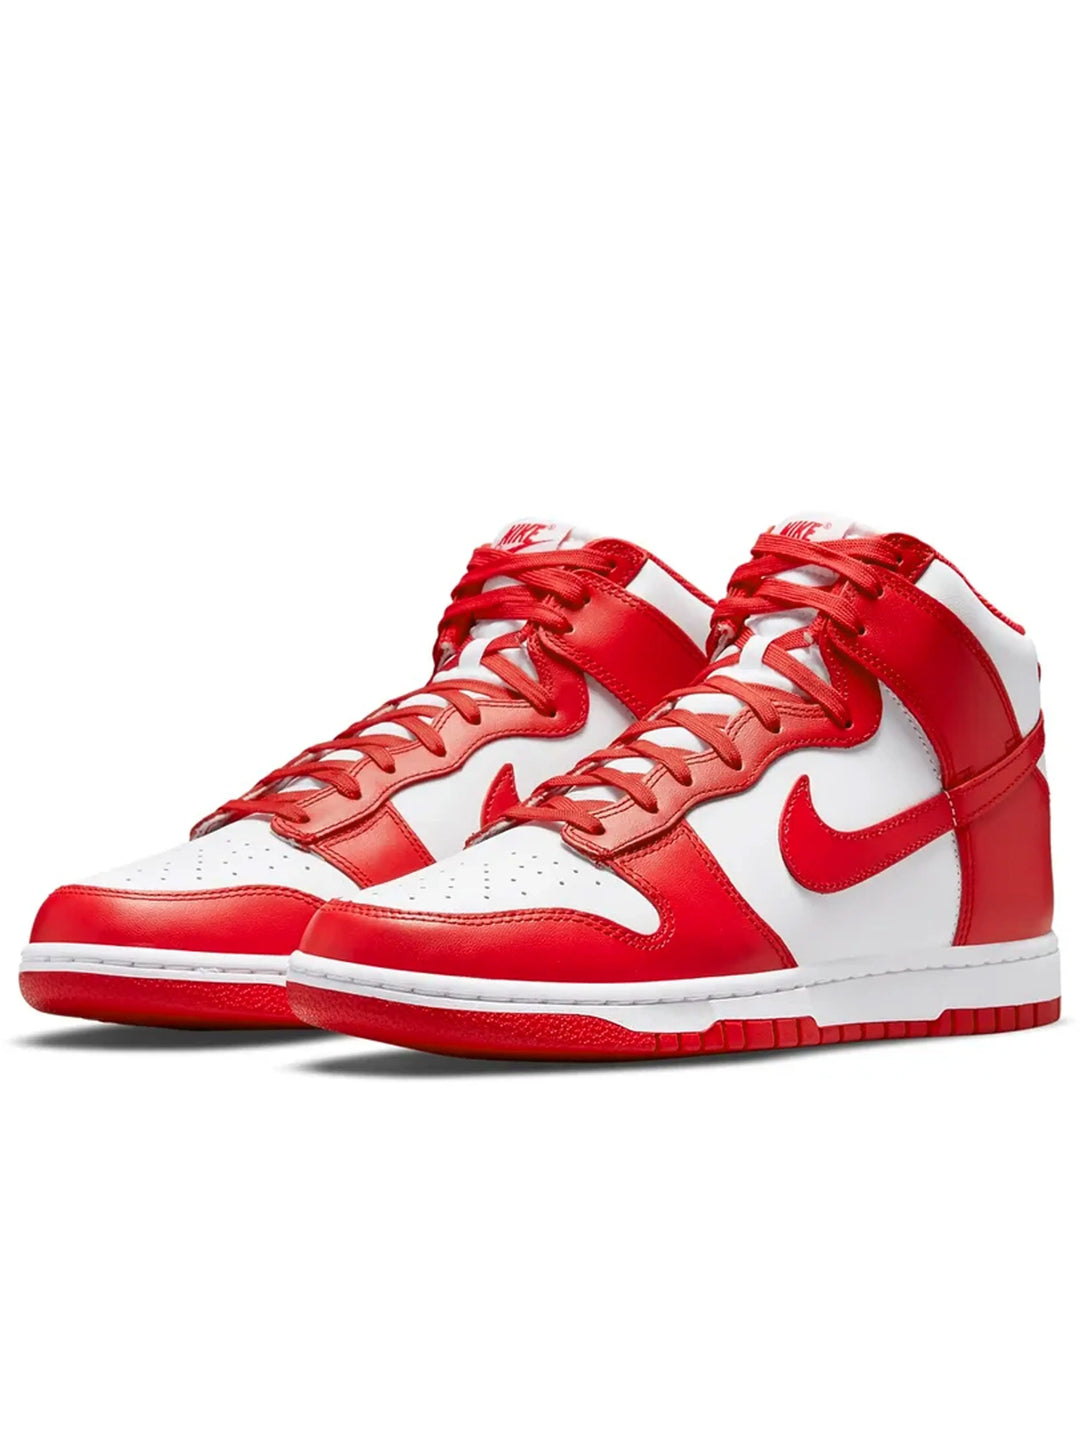 Nike Dunk High Championship Red (GS) Prior